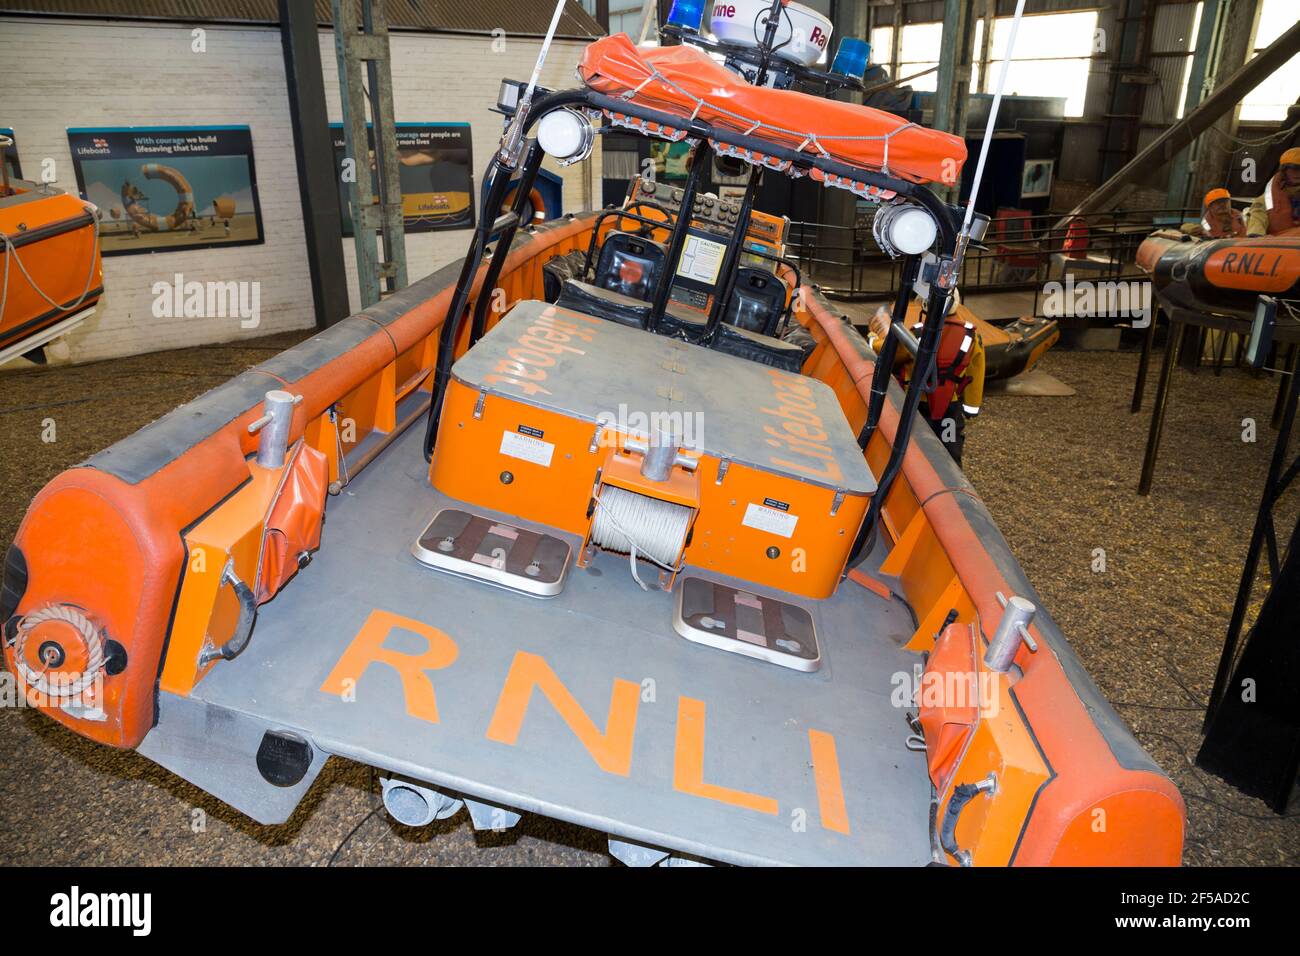 Modern vintage historic RNLI Lifeboat (thought to be the Mark 1 E-002 'Olive Laura Deare') on display at Number Four Boat House / Boathouse Number 4 at Historic Dockyard / Dockyards Chatham in Kent. UK (121) Stock Photo